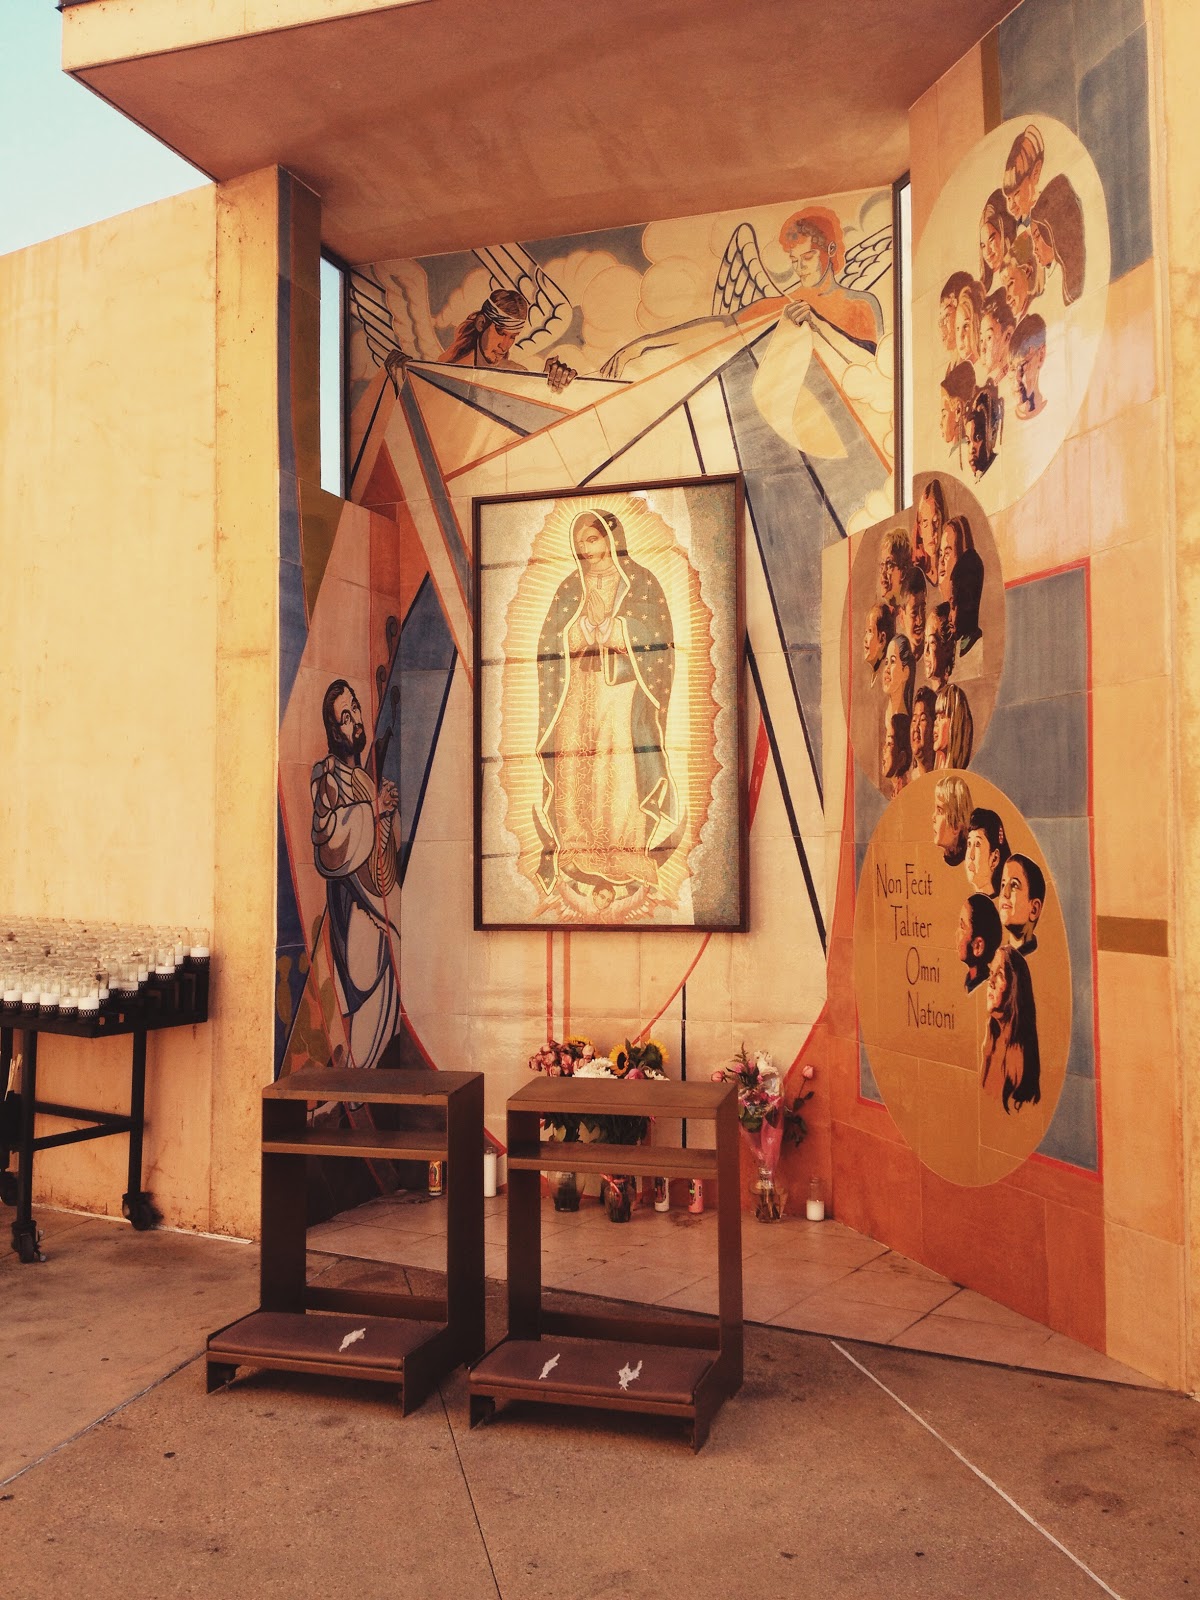 the Virgin Mary at cathedral of our lady of angels